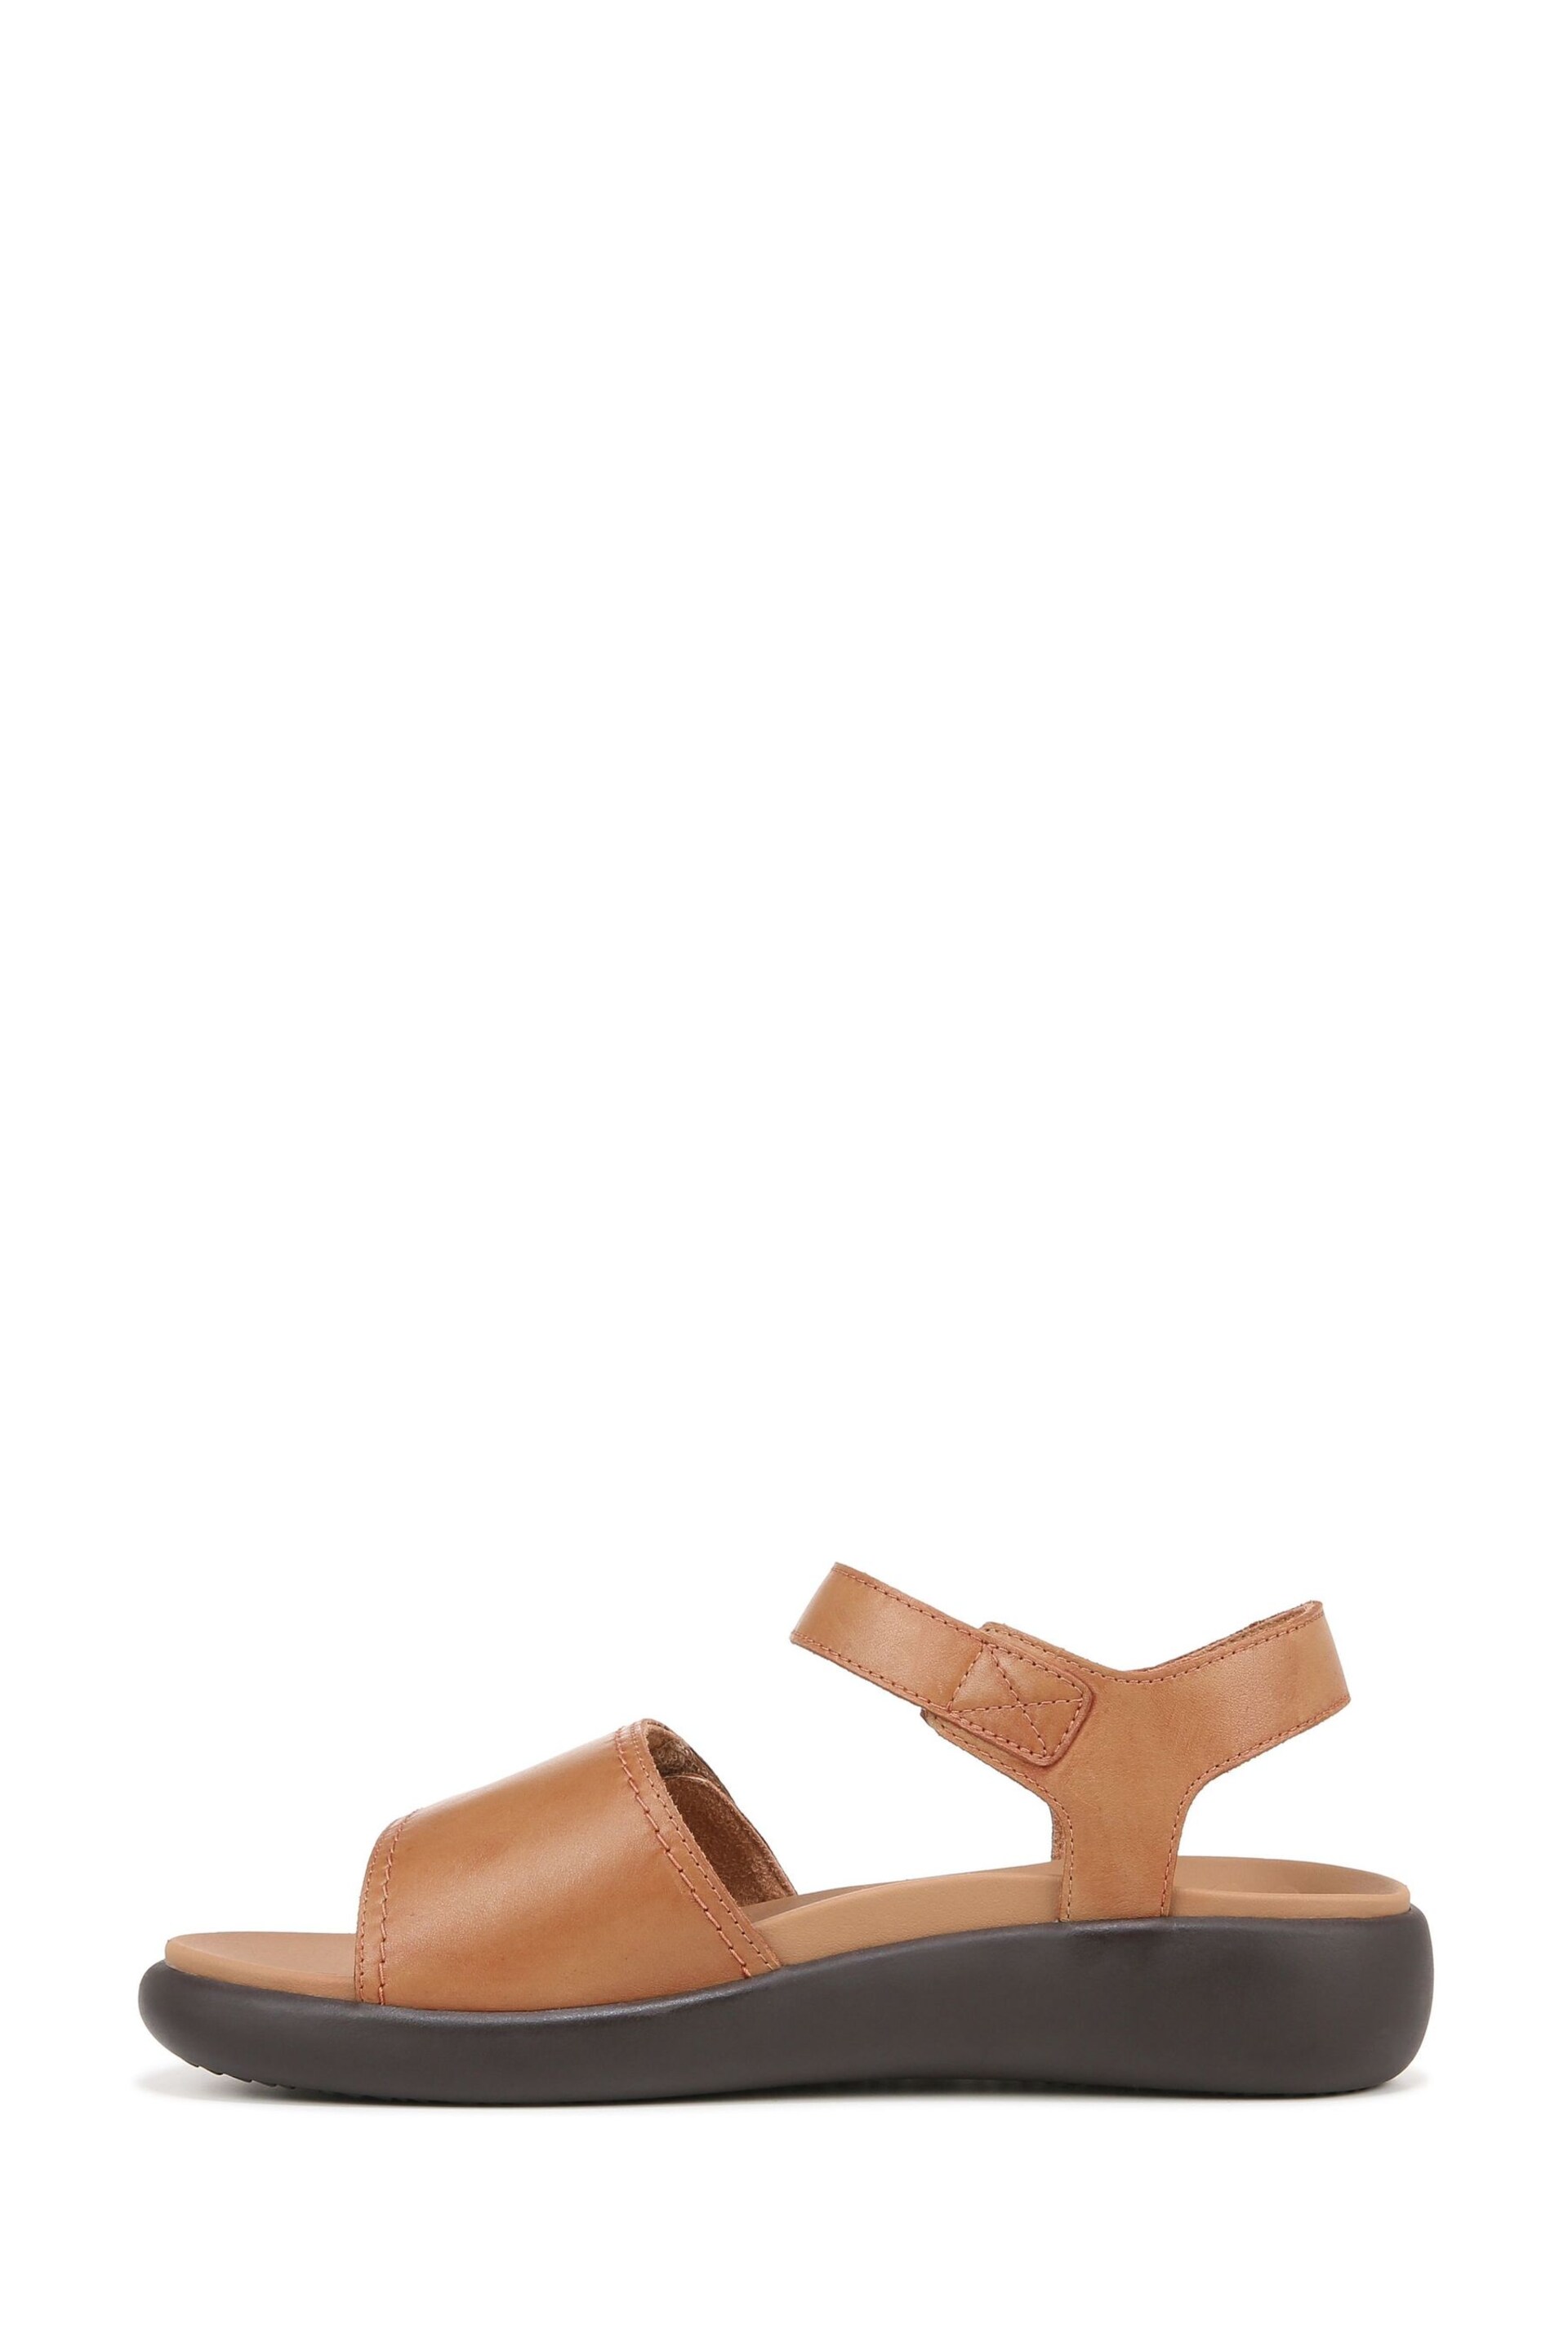 Vionic Awaken Wide Fit Ankle Strap Sandals - Image 2 of 7